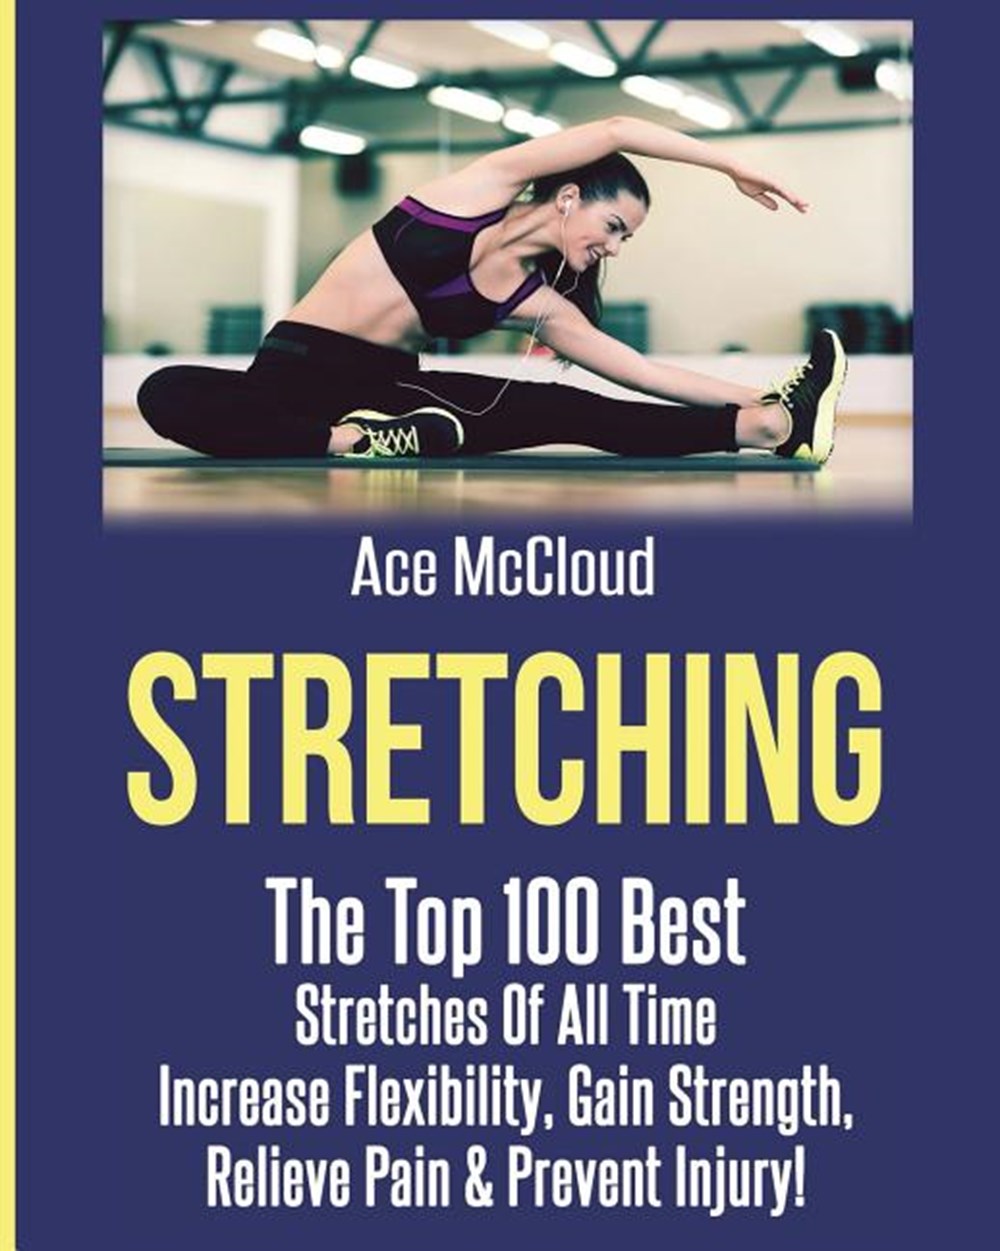 Stretching The Top 100 Best Stretches Of All Time: Increase Flexibility, Gain Strength, Relieve Pain